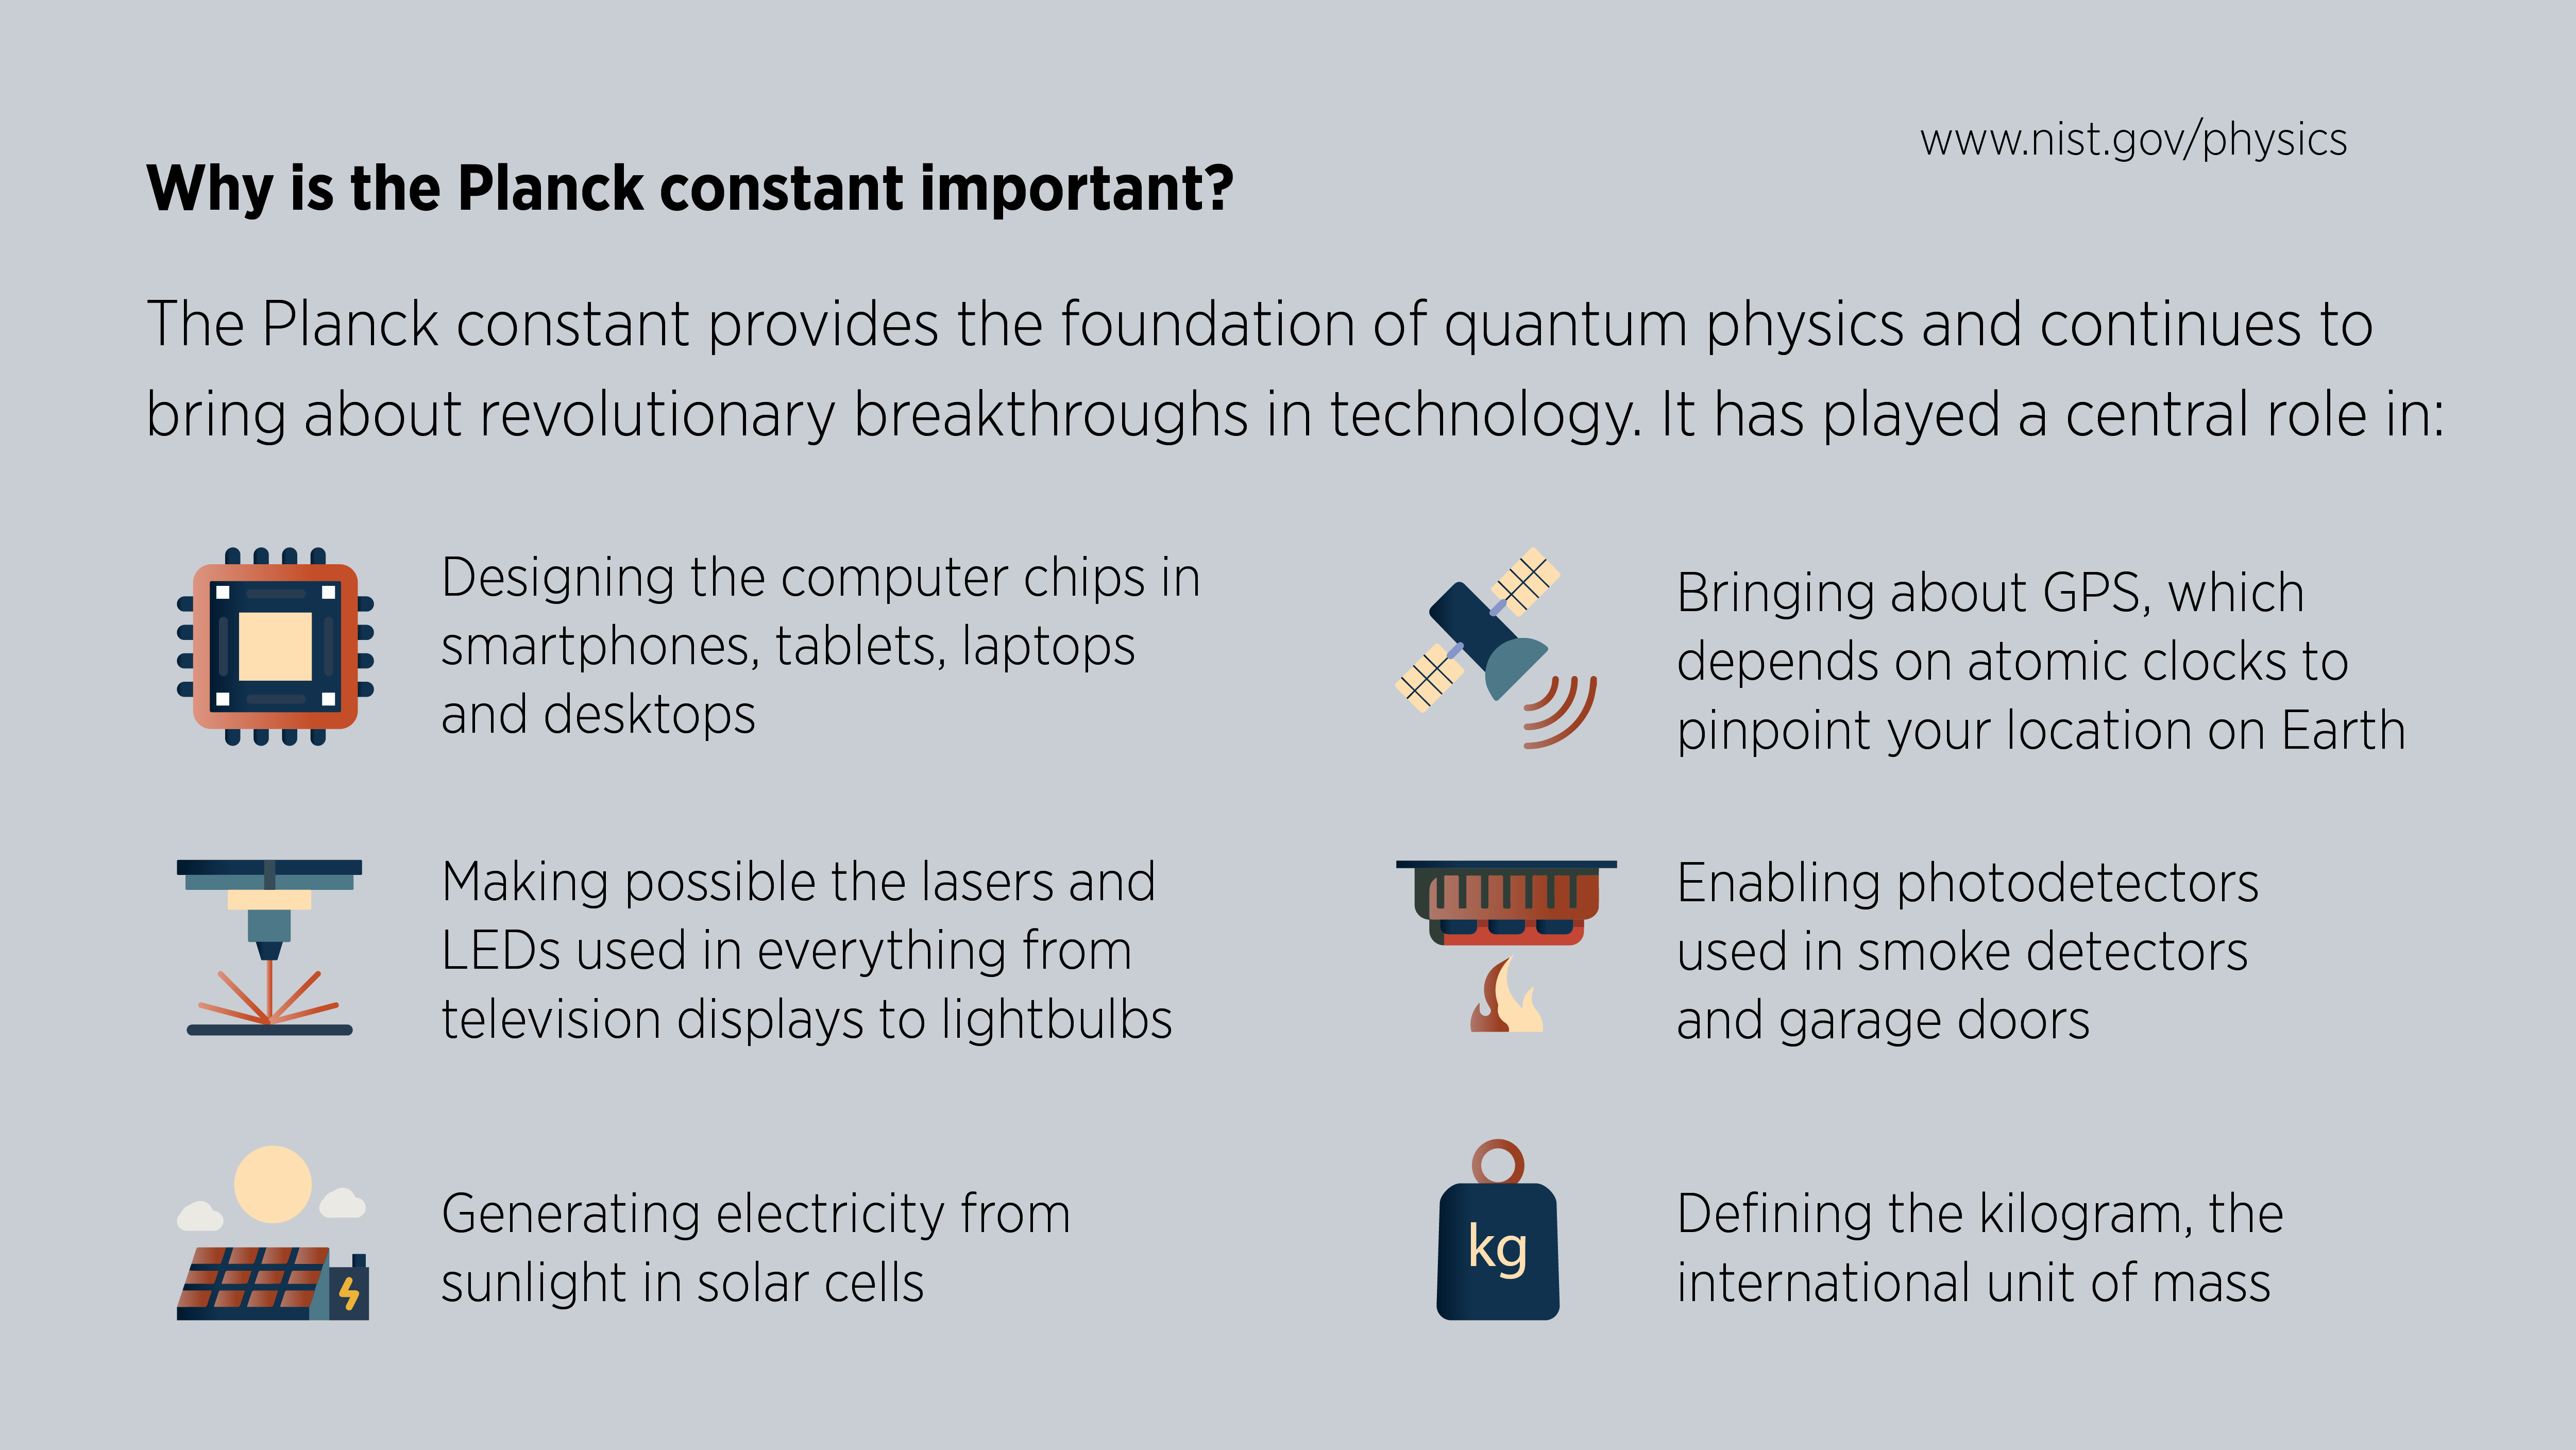 Illustration says "Why is the Planck constant important?" with examples of computer chips, lasers, etc.